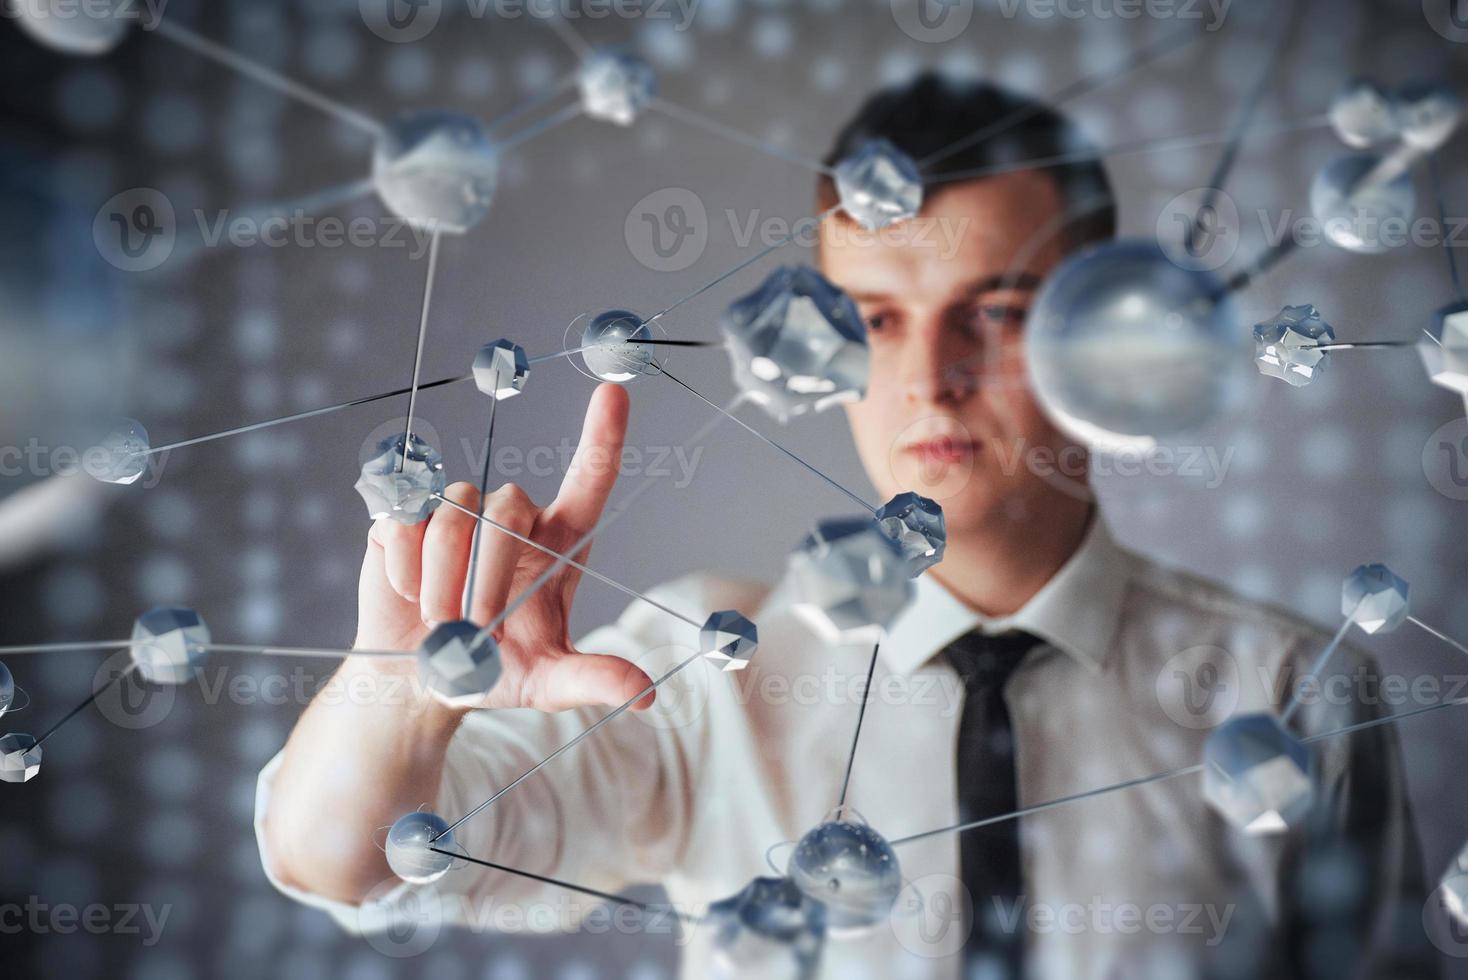 Innovative technologies in science and medicine. Technology to connect. The concept of security photo